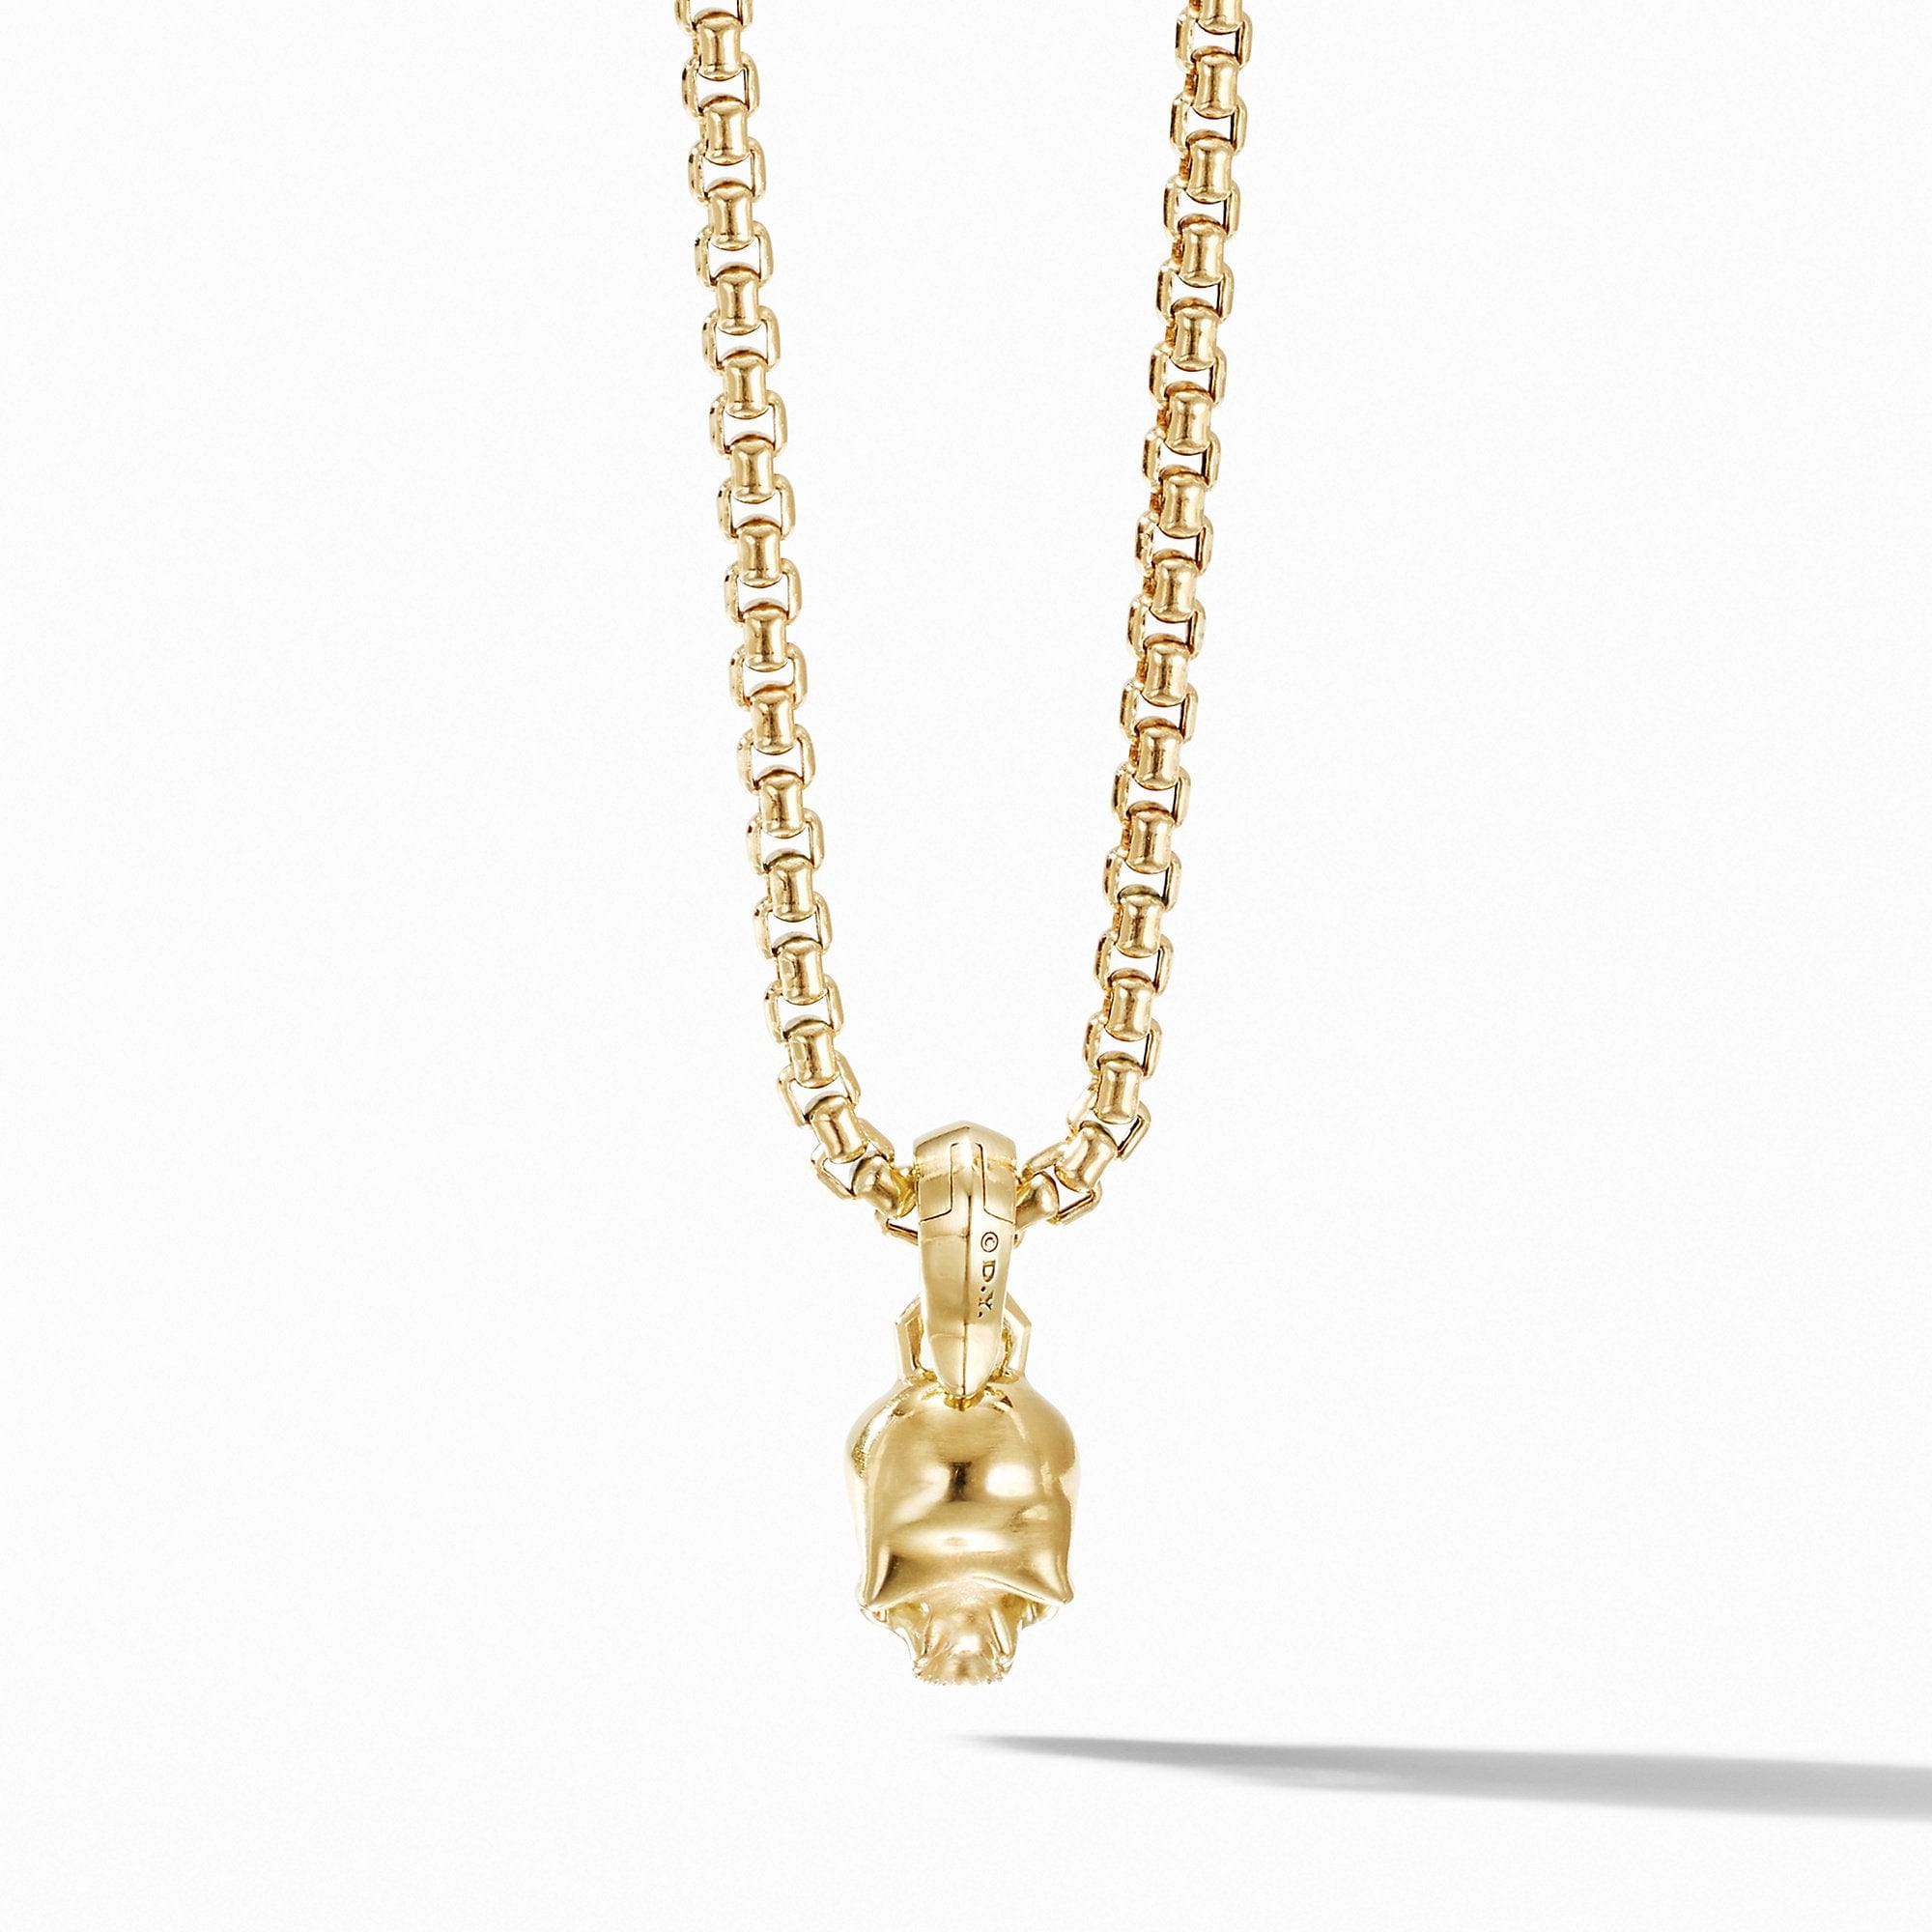 Extra Small Skull Charm in 18K Yellow Gold with Pavé Diamonds